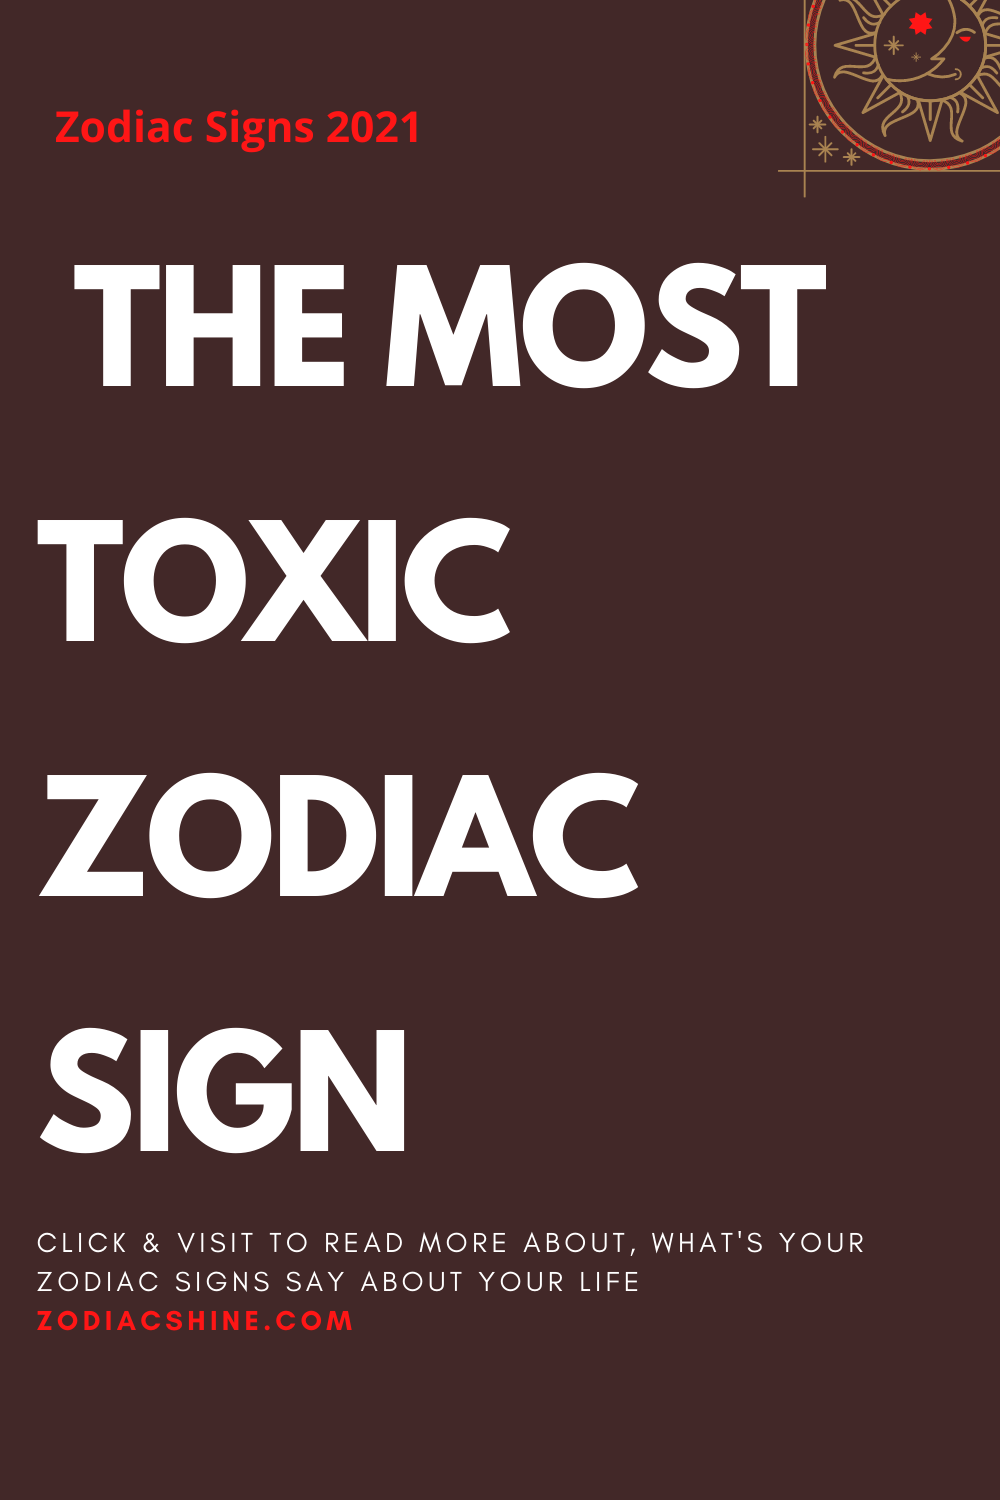  THE MOST TOXIC ZODIAC SIGN 